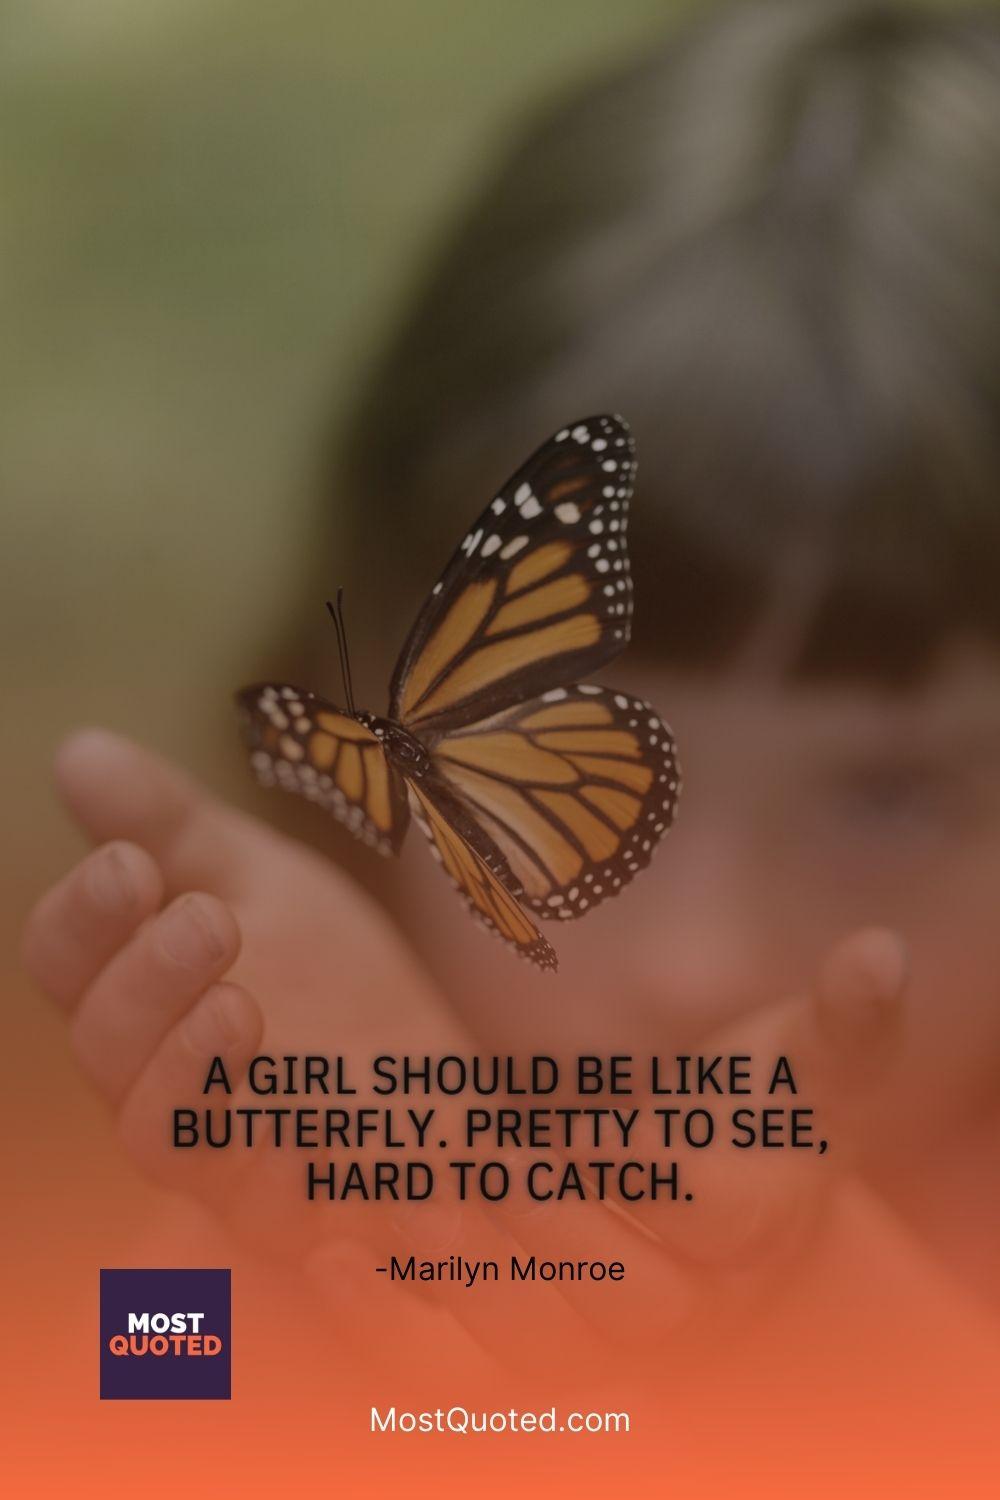 A girl should be like a butterfly. Pretty to see, hard to catch. - Marilyn Monroe